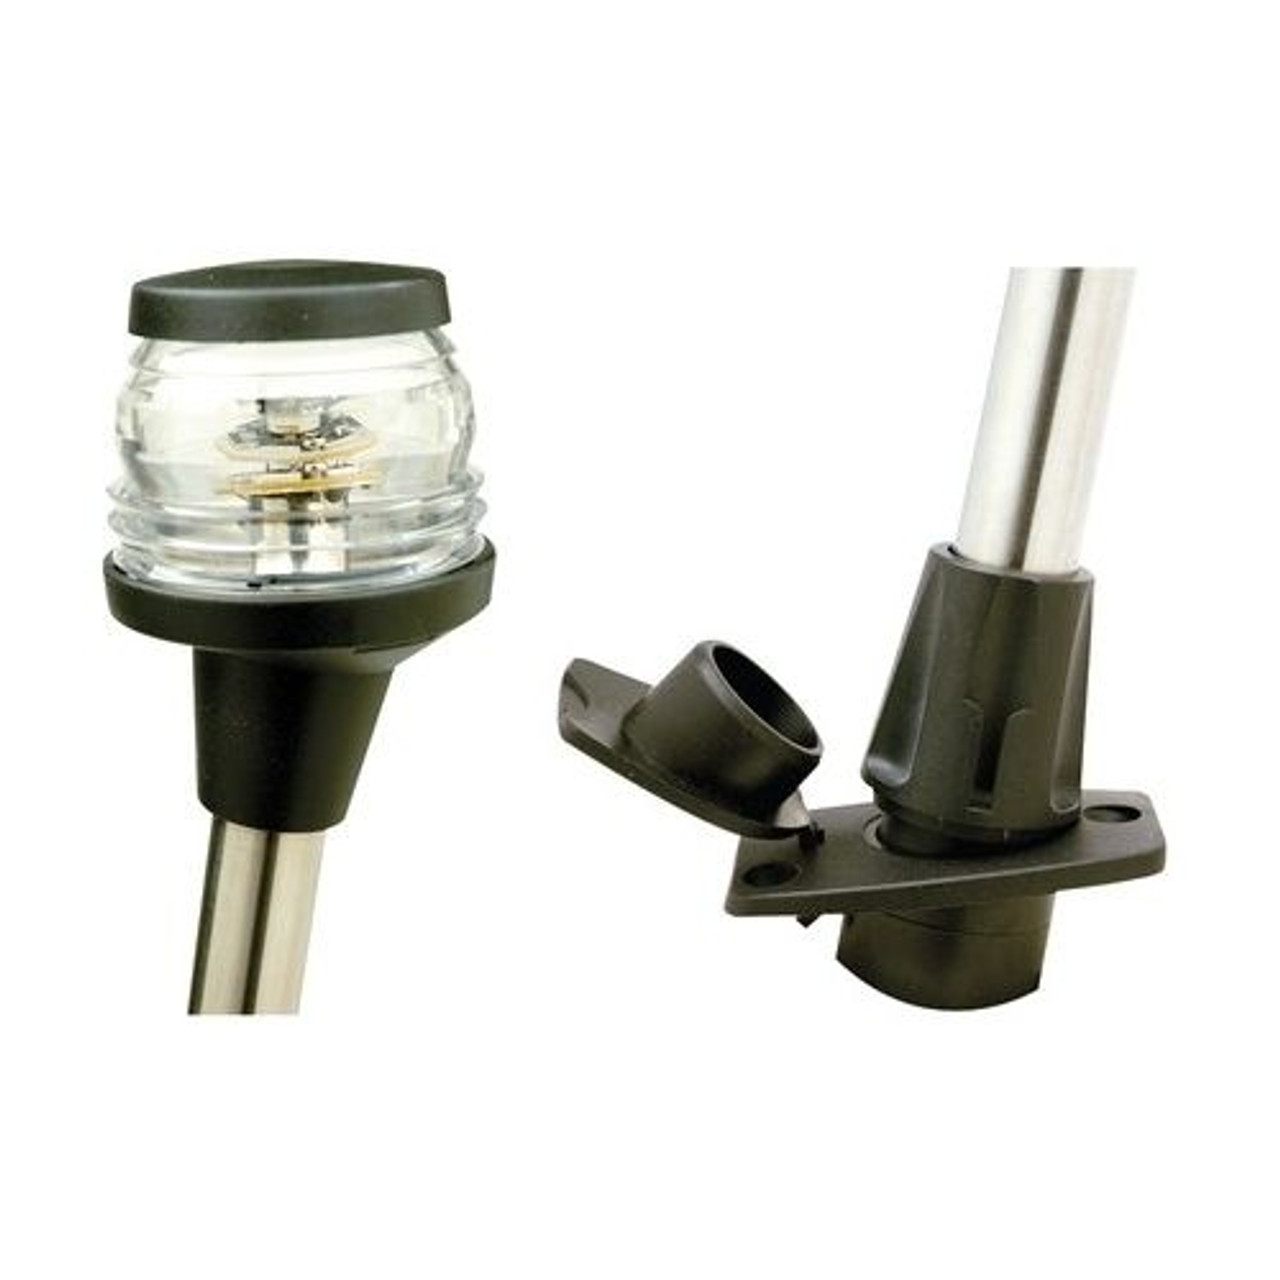 48 Inch LED Stow-A-Way All Around White Navigation Light and Base for Boats